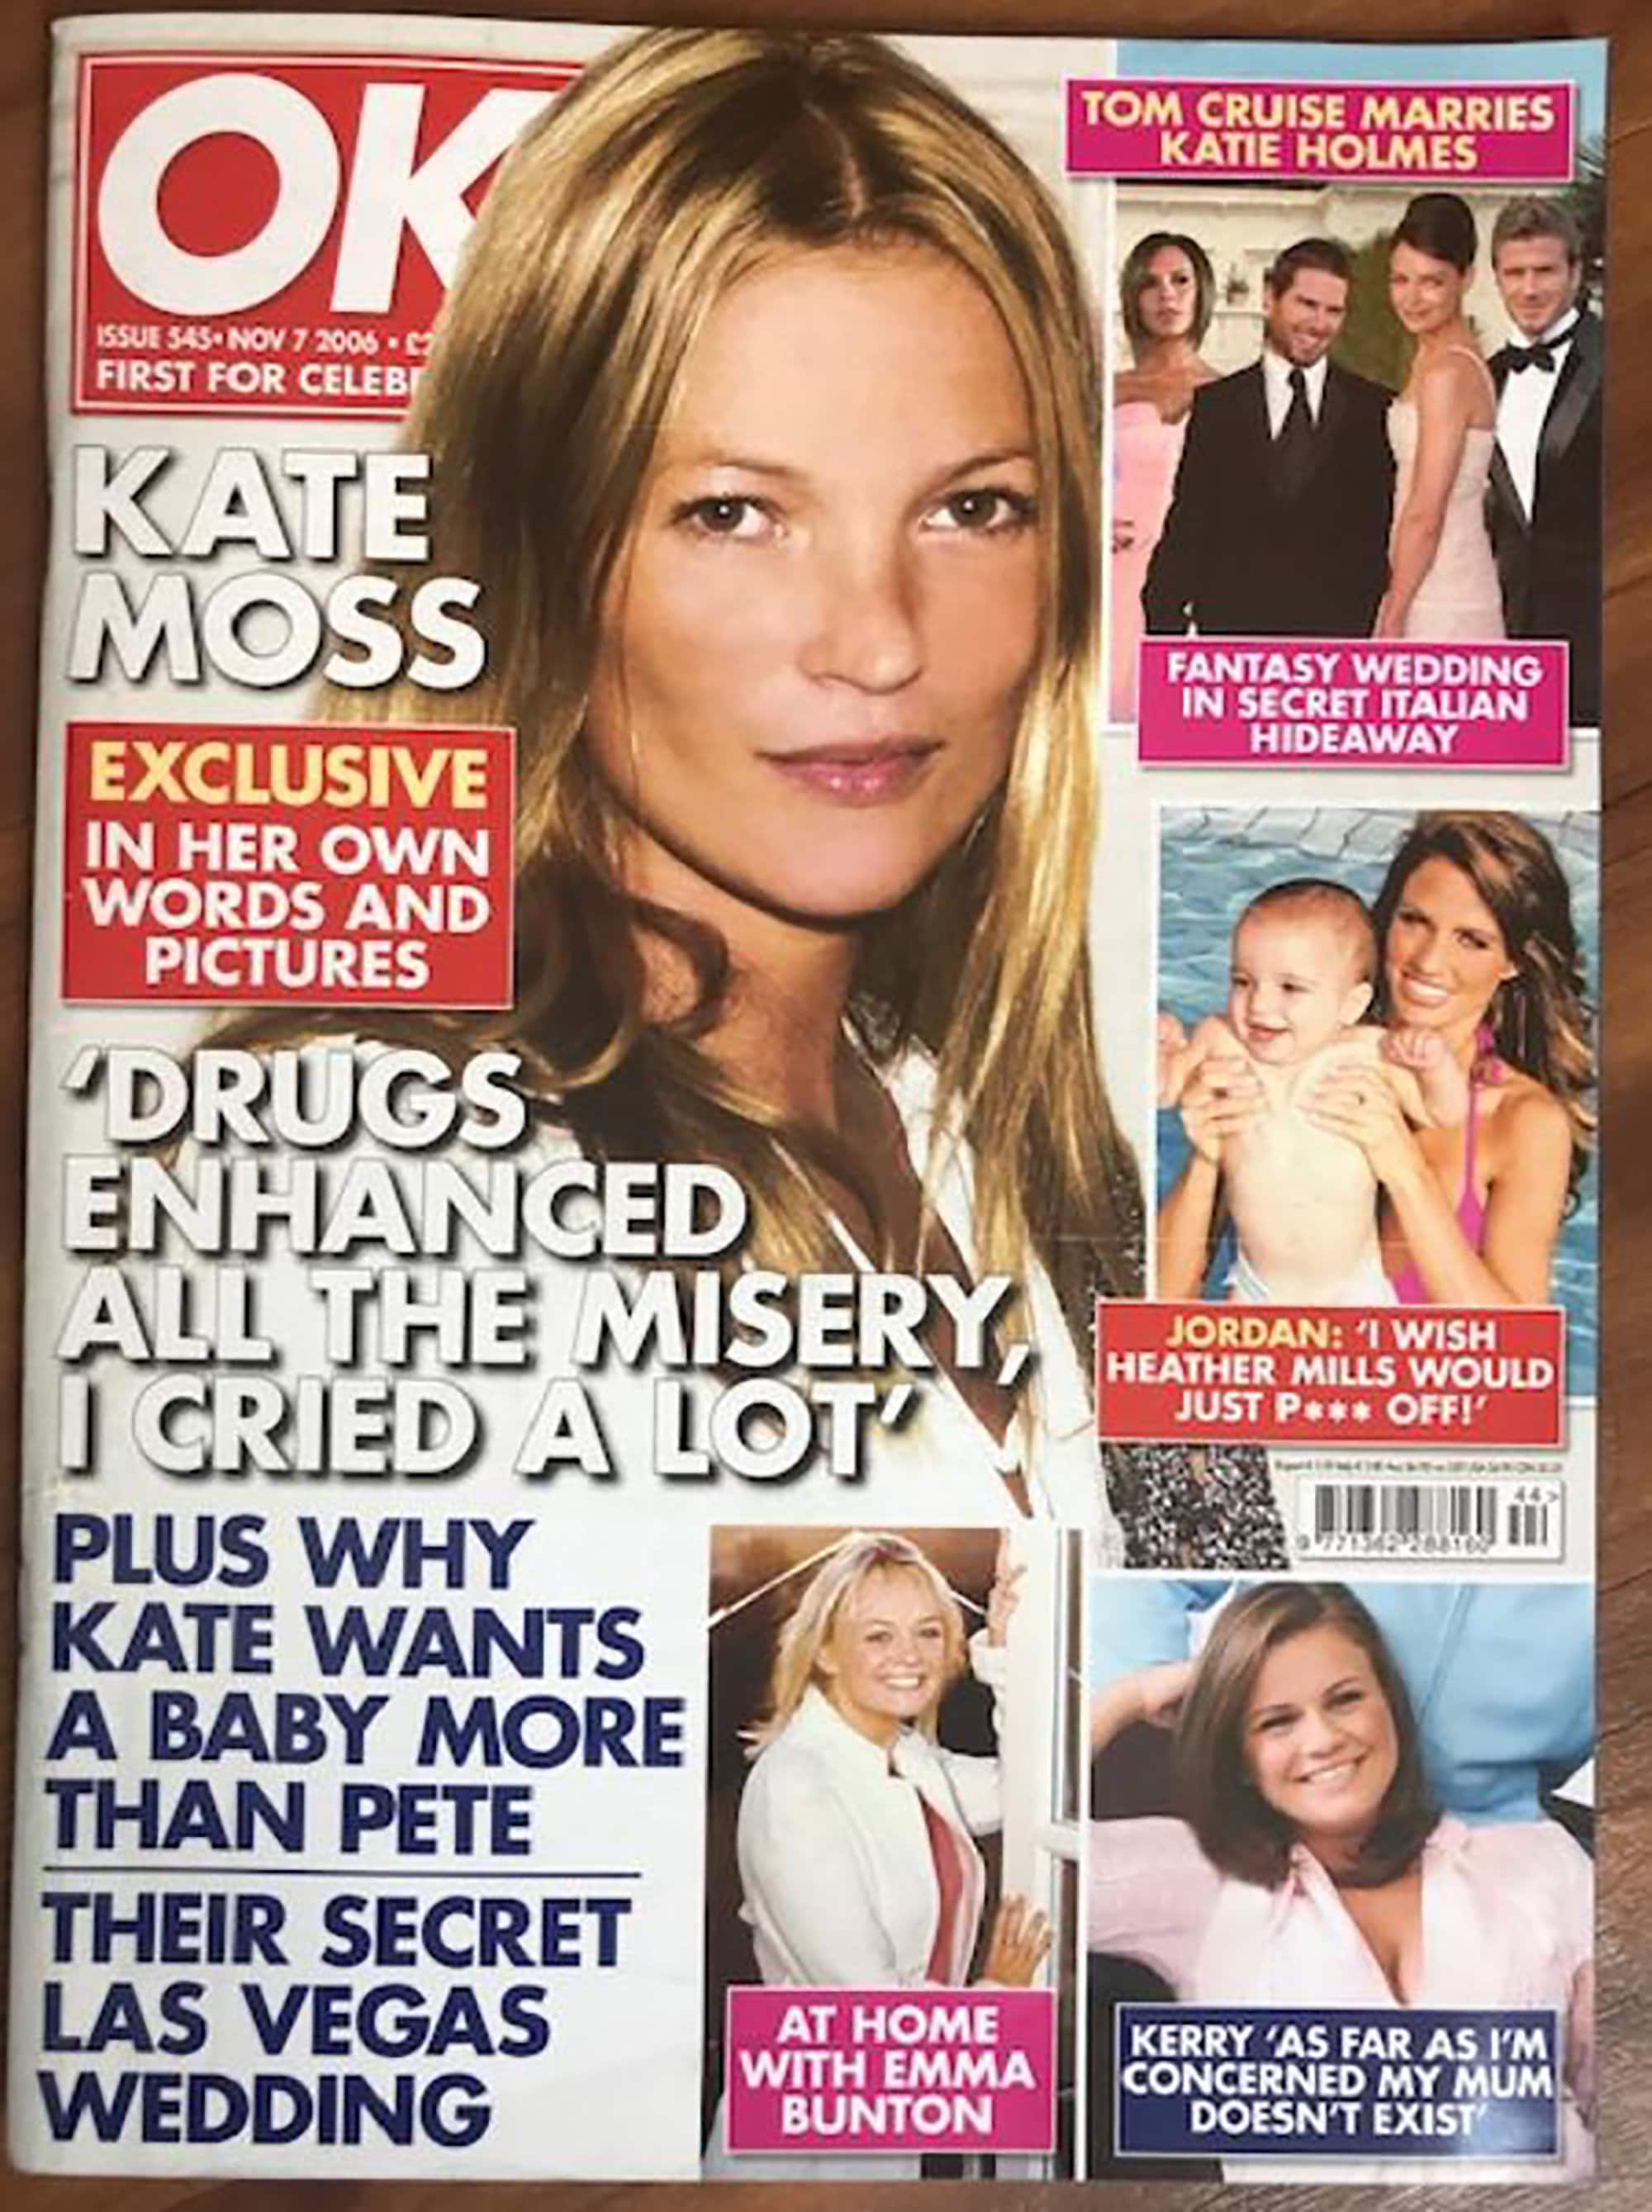 Issue 545 Nov 7 First News Celebrity Kate Moss - Etsy